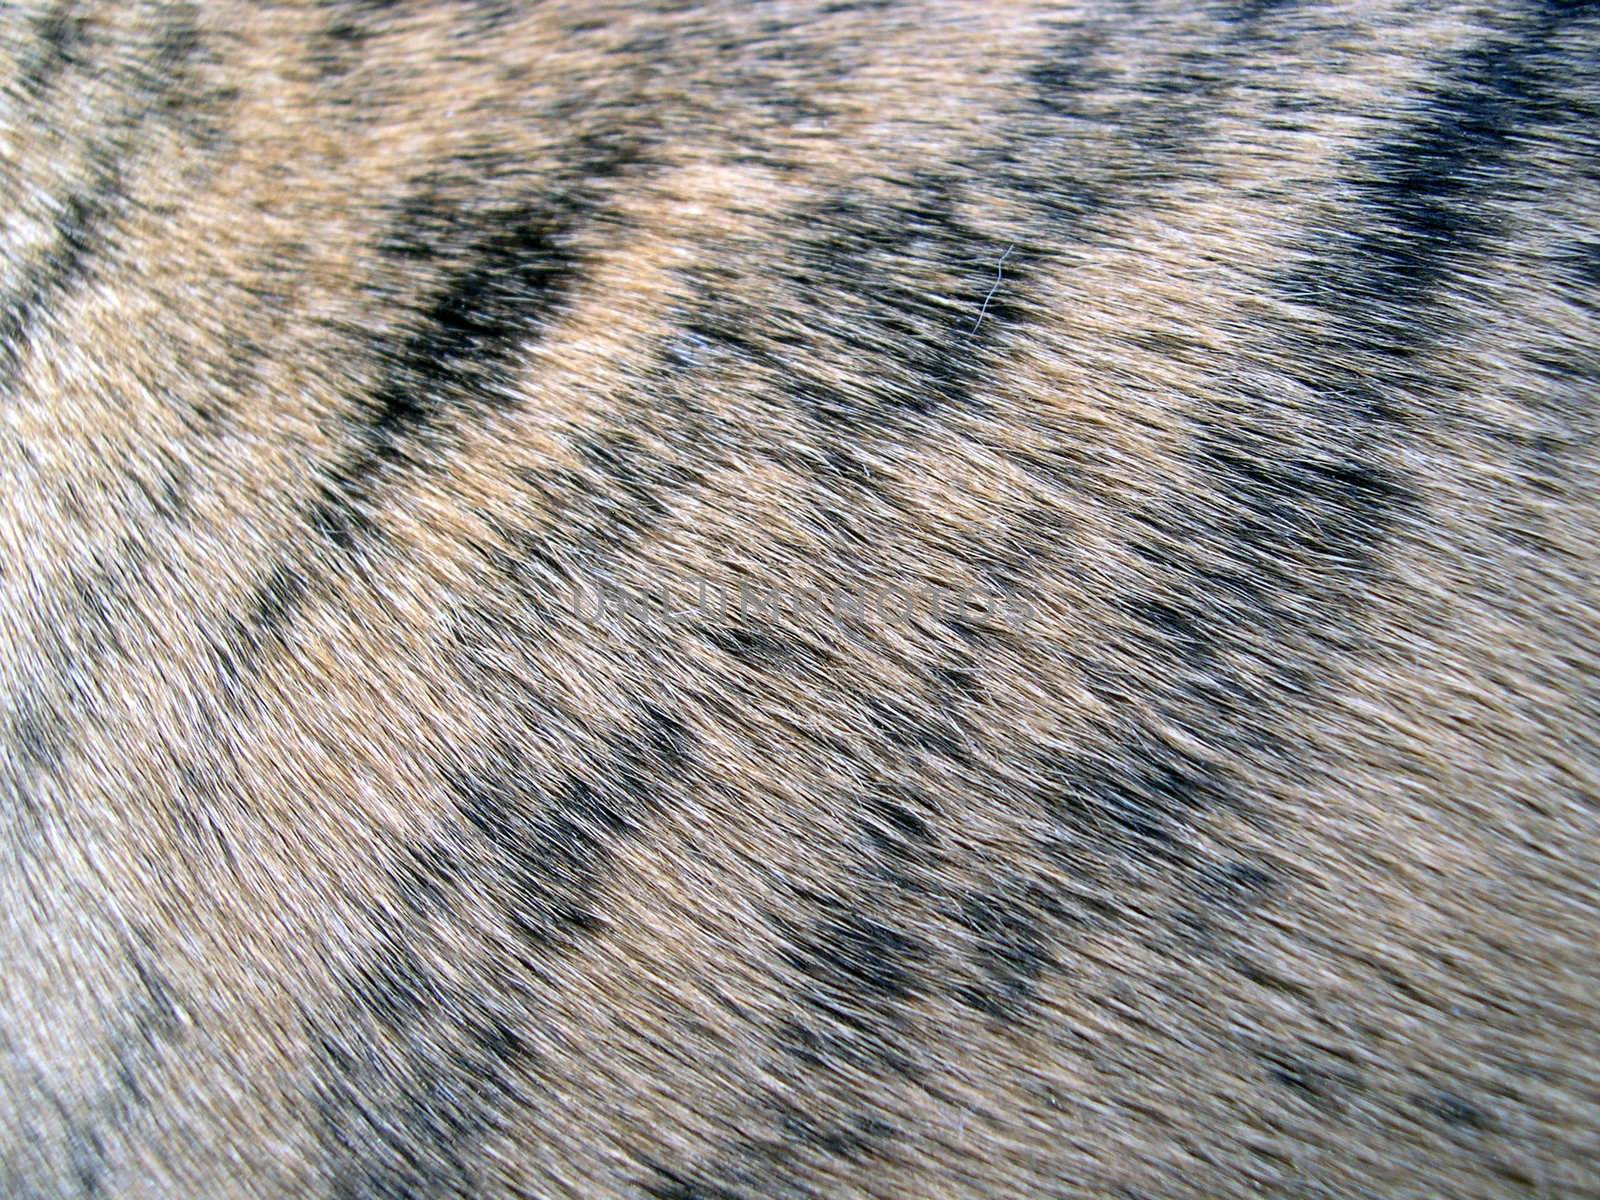 tiger striped pattern in a dog's hair